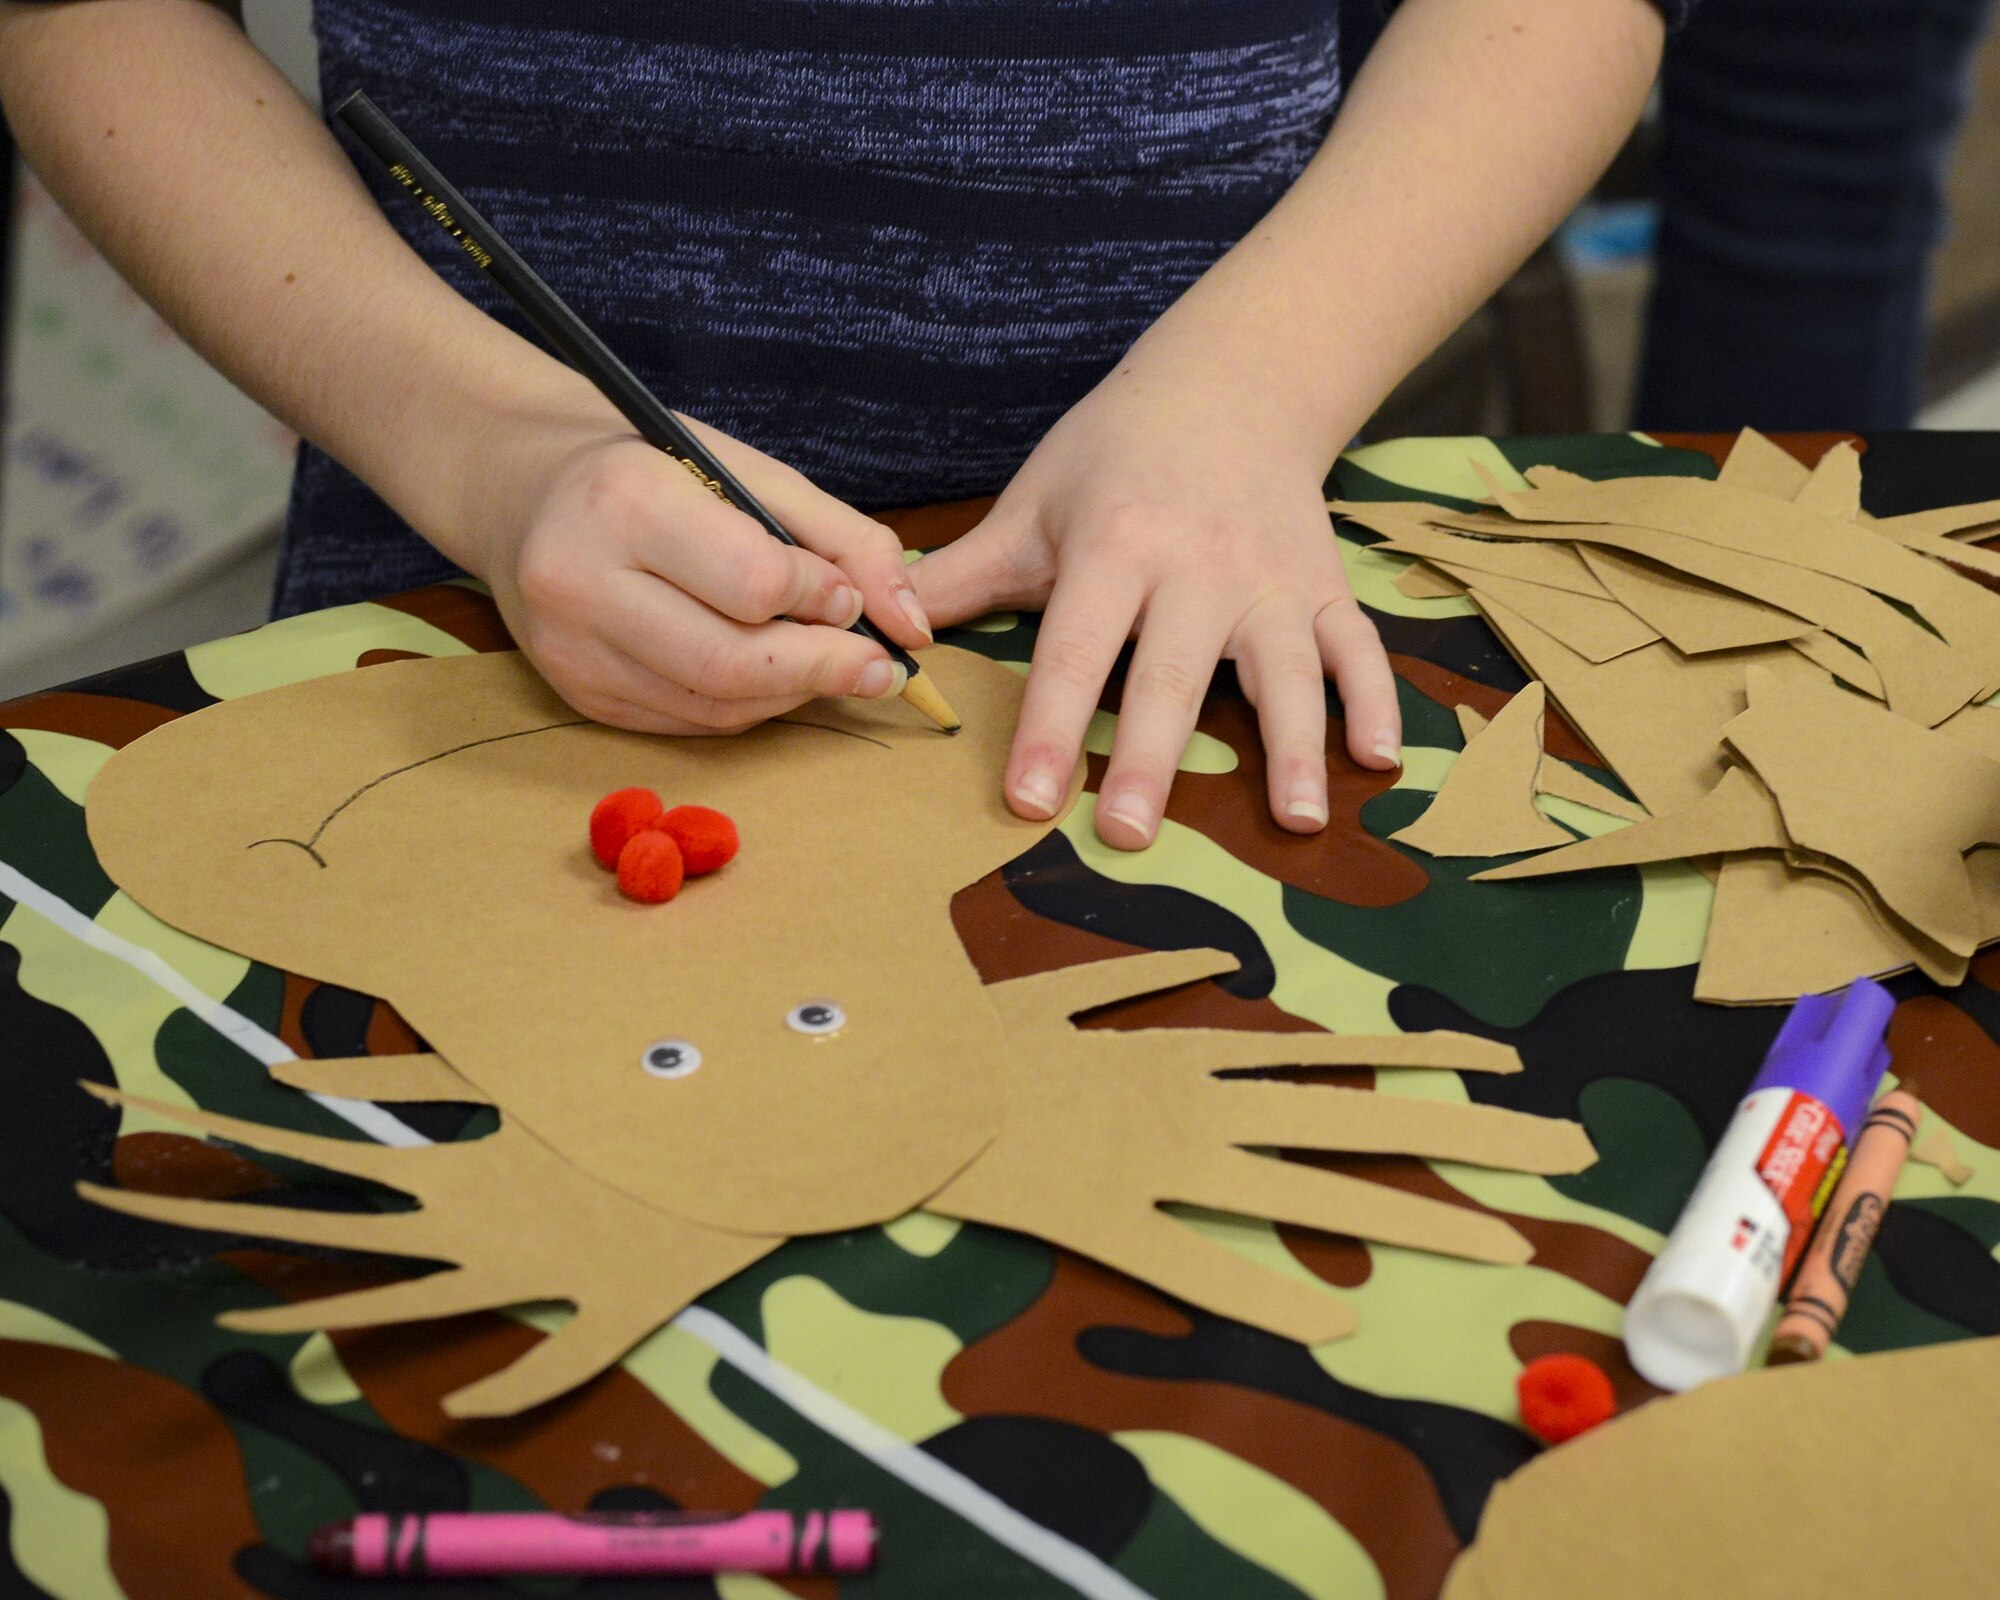 A child makes a craft during a holiday party, Dec. 15, 2017, at Moody Air Force Base, Ga. The Airman and Family Readiness Center hosted the event for families of deployed or remote-tour Airmen, and families enrolled in the Exceptional Family Member Program. During the party, families enjoyed a turkey dinner, played games, made arts and crafts for their loved ones and shared a special moment with Santa Claus. (U.S. Air Force photo by Senior Airman Lauren M. Sprunk)